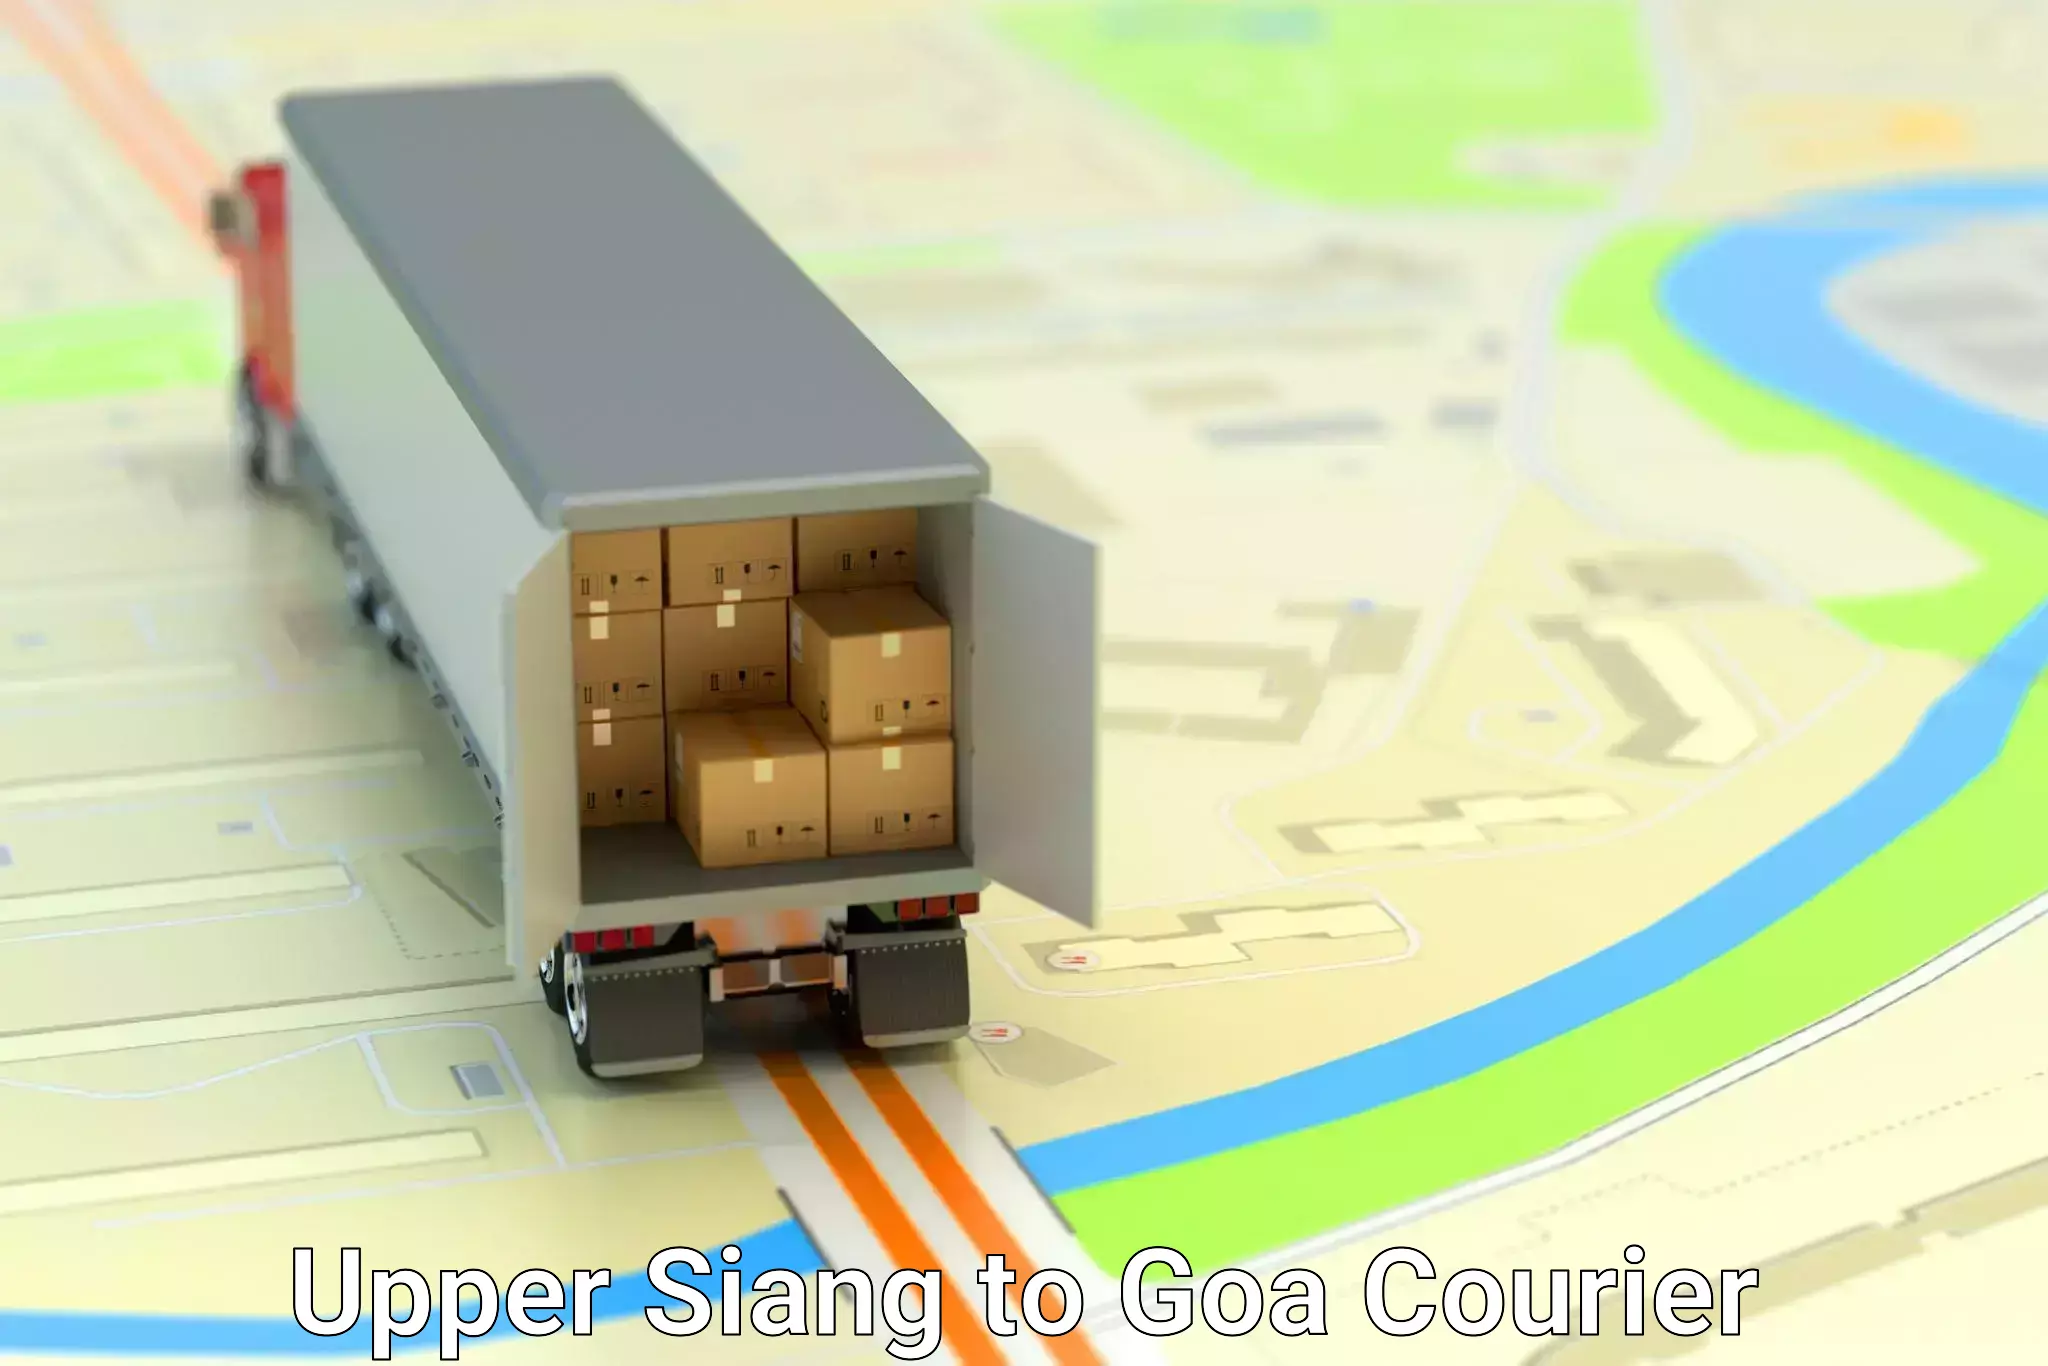 Comprehensive logistics solutions in Upper Siang to Goa